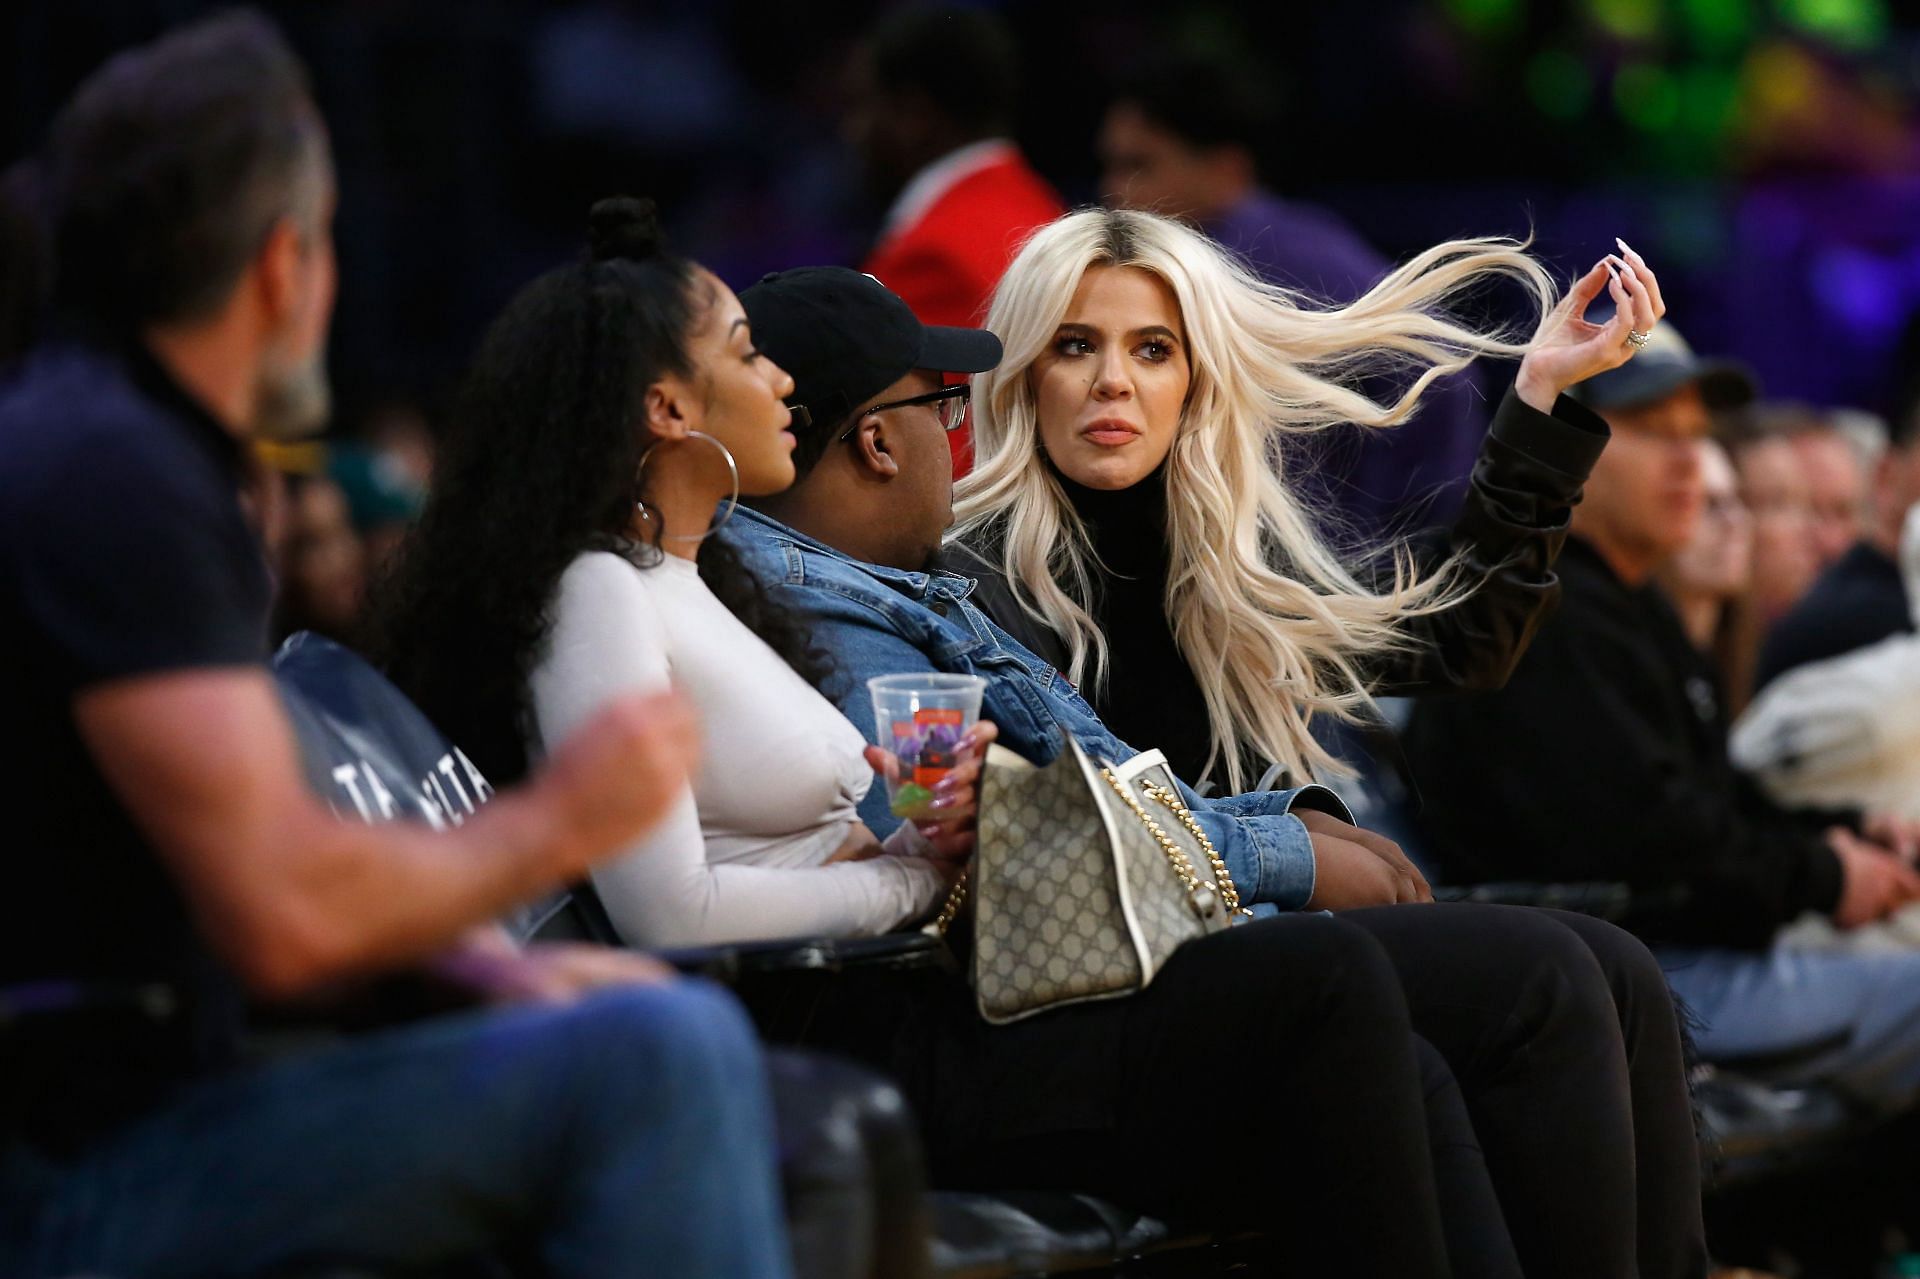 Khloe Kardashian supported Tristan Thompson at games during their relationship.